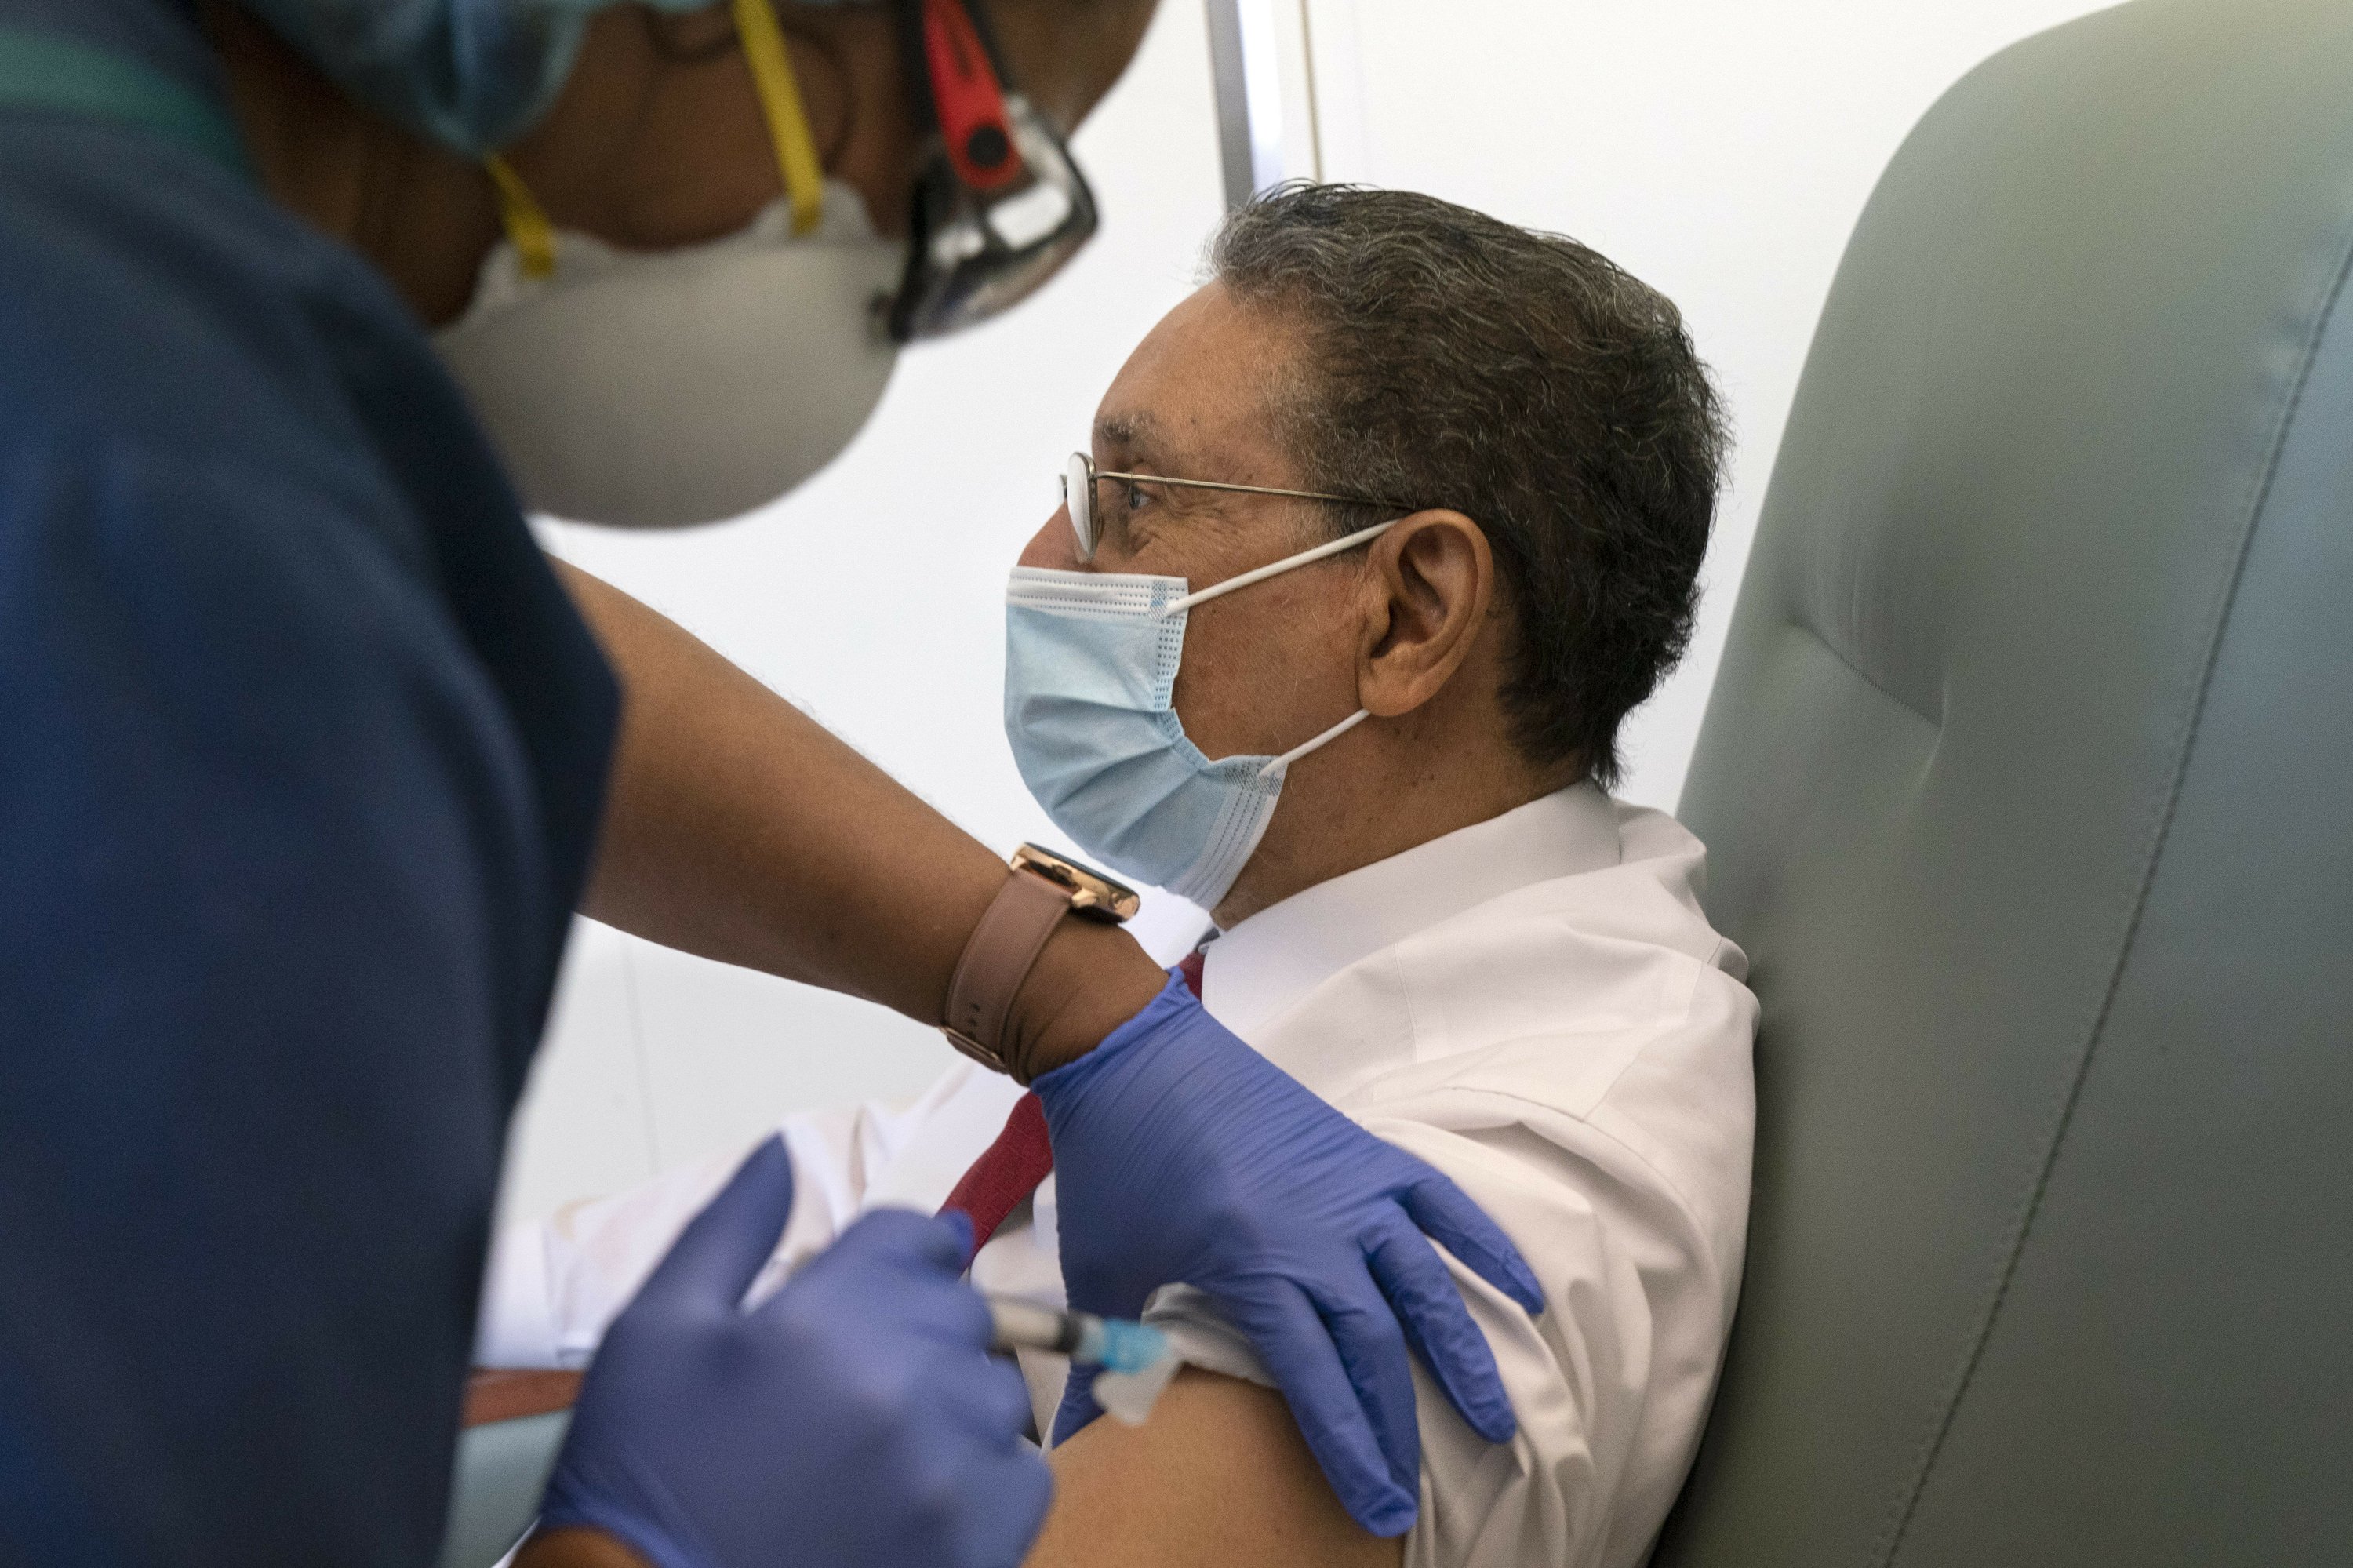 Washington summons pastors to overcome racial divide in vaccination